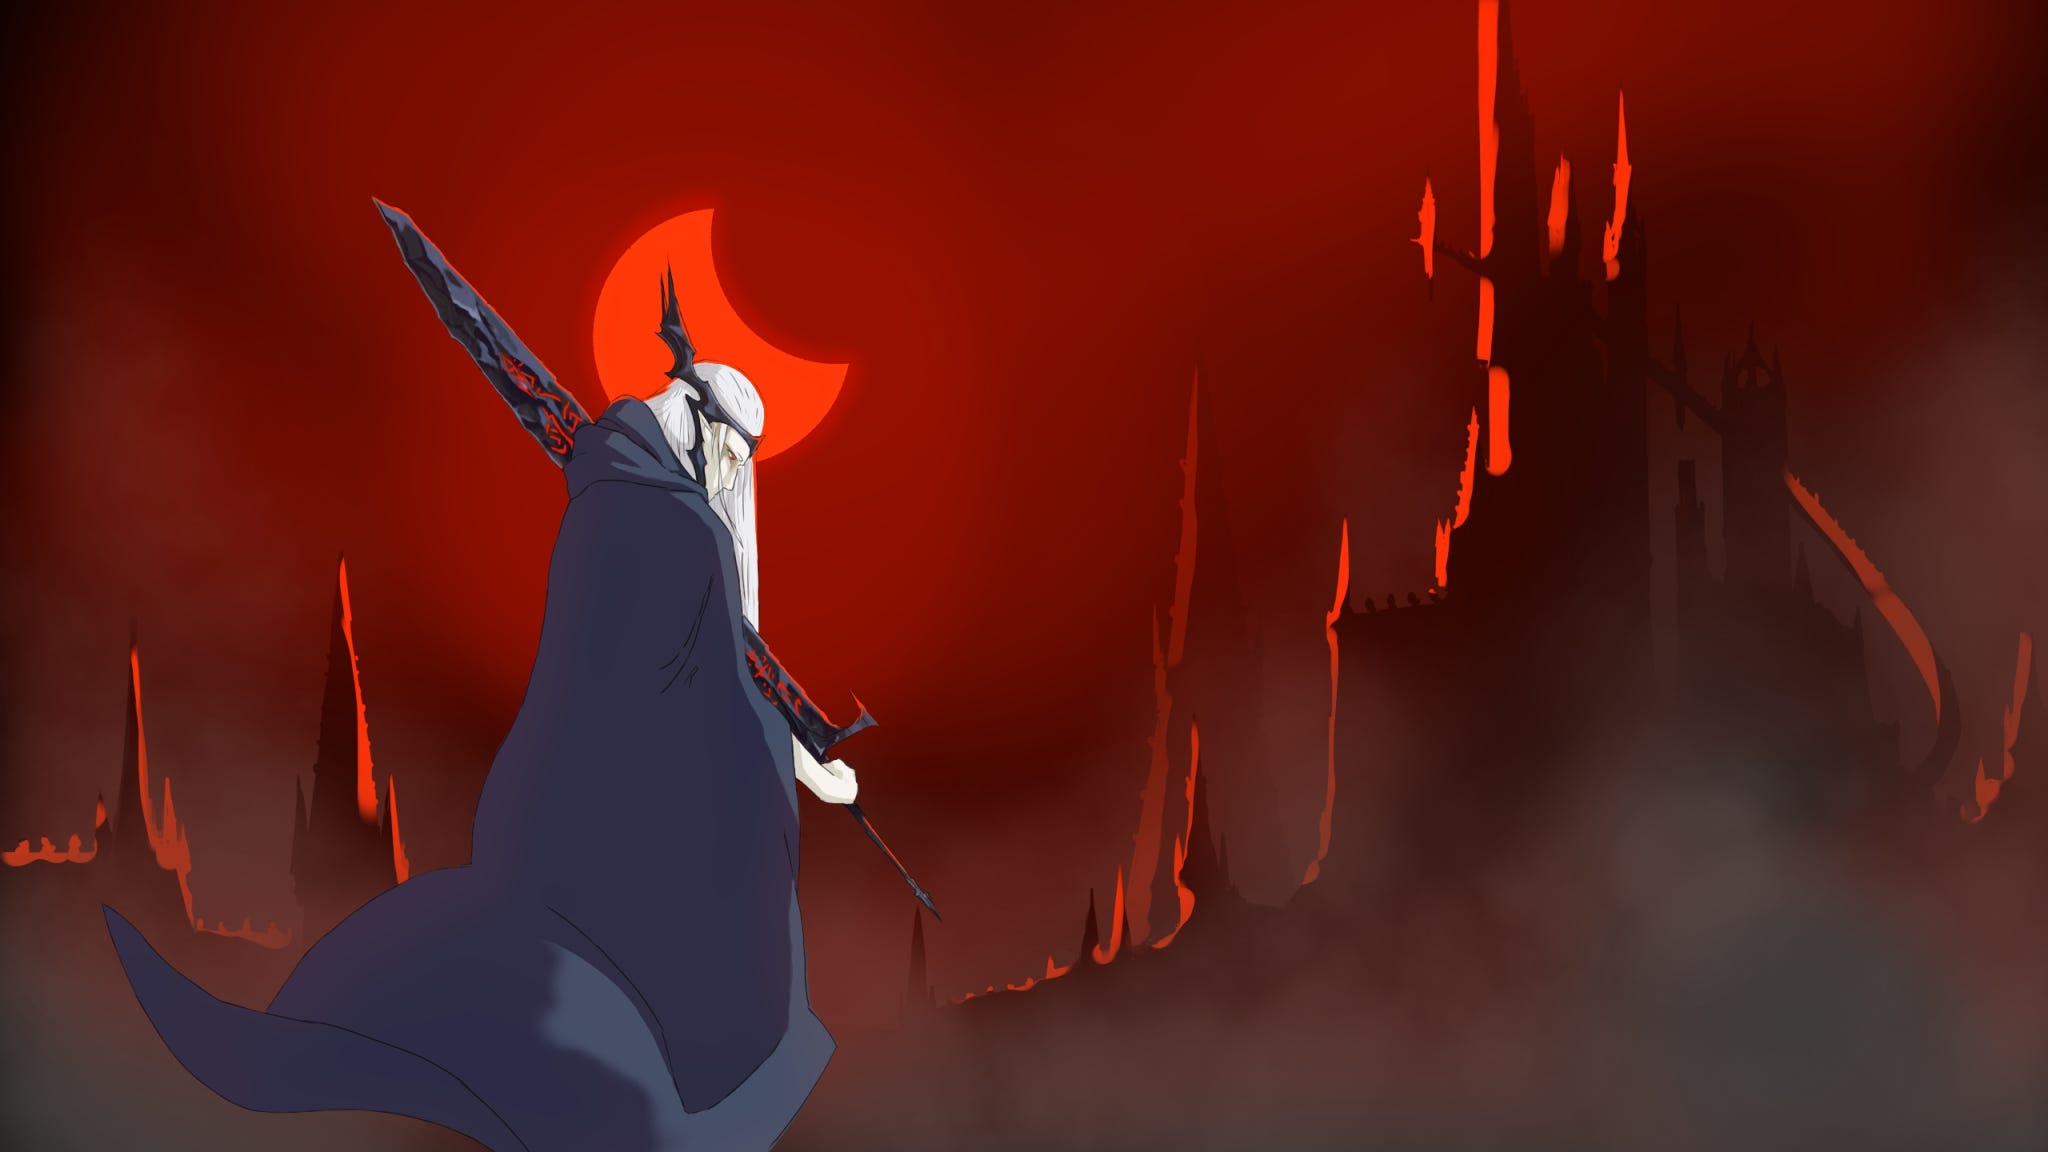 Michael Moorcock's Elric of Melniboné holding his sword Stormbringer in front of an apocalyptic landscape at the end of time.